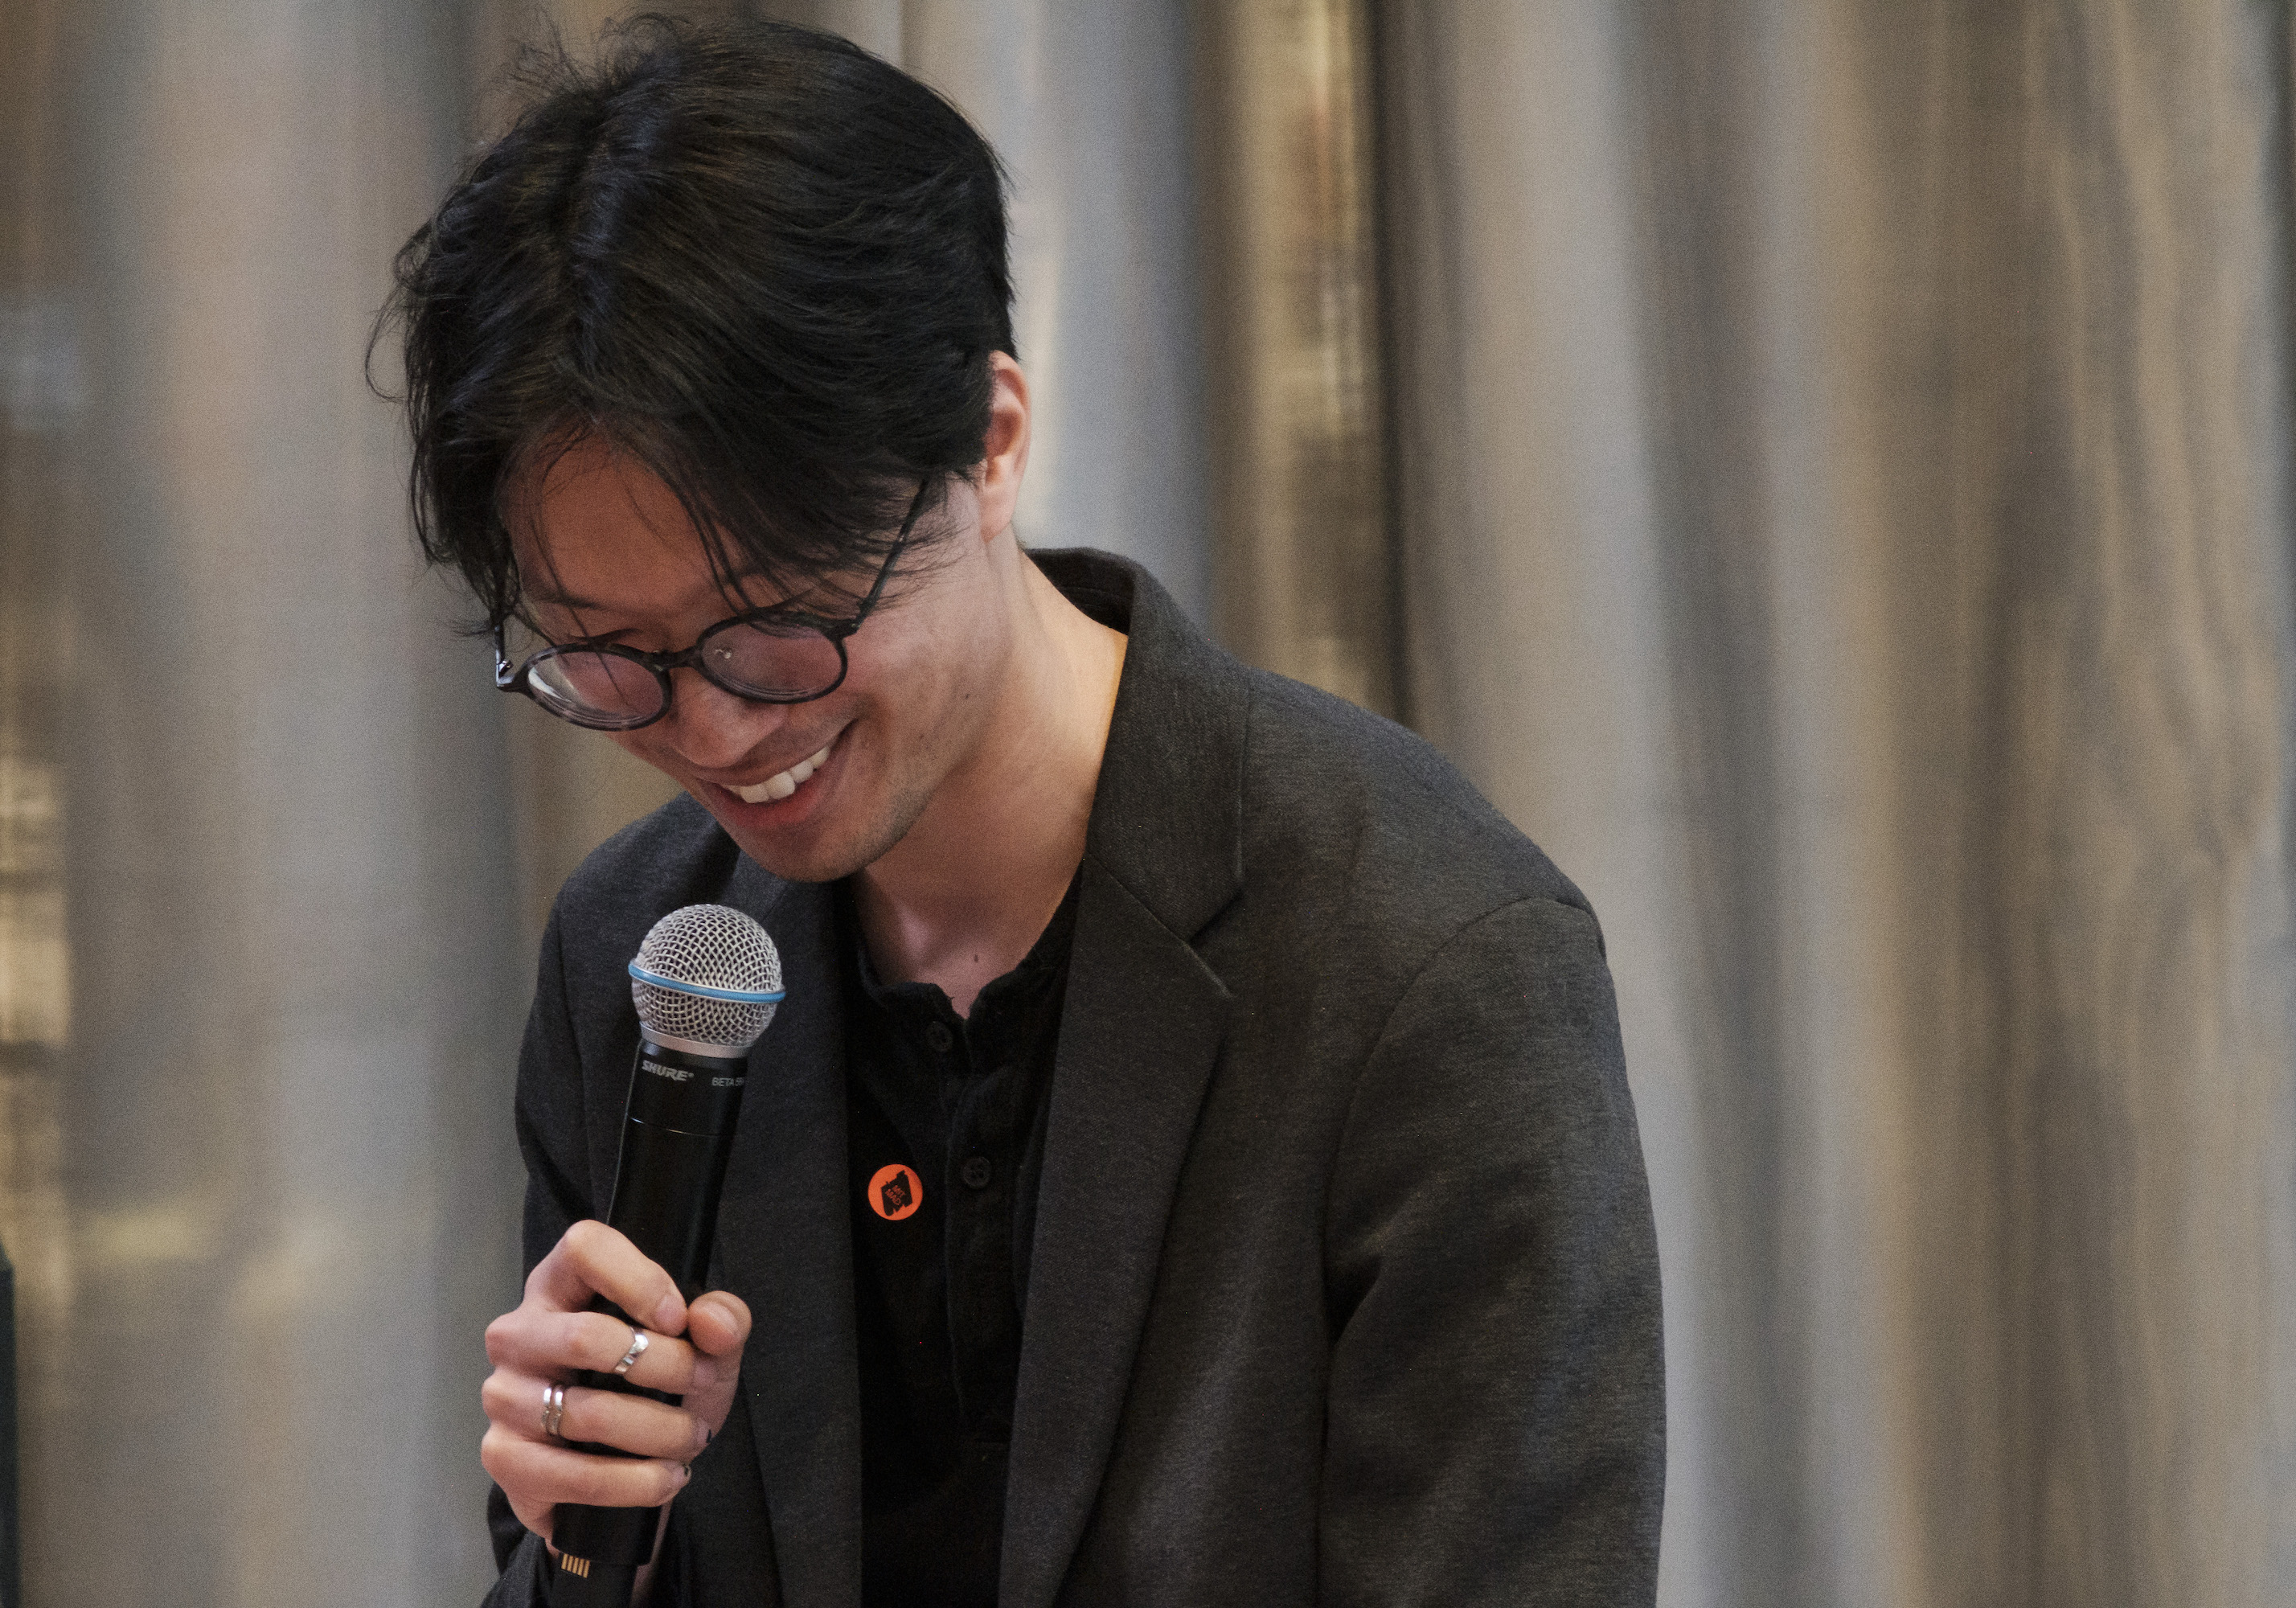 A professional photo of Jonathan Zong. He is looking down and smiling while holding a microphone.